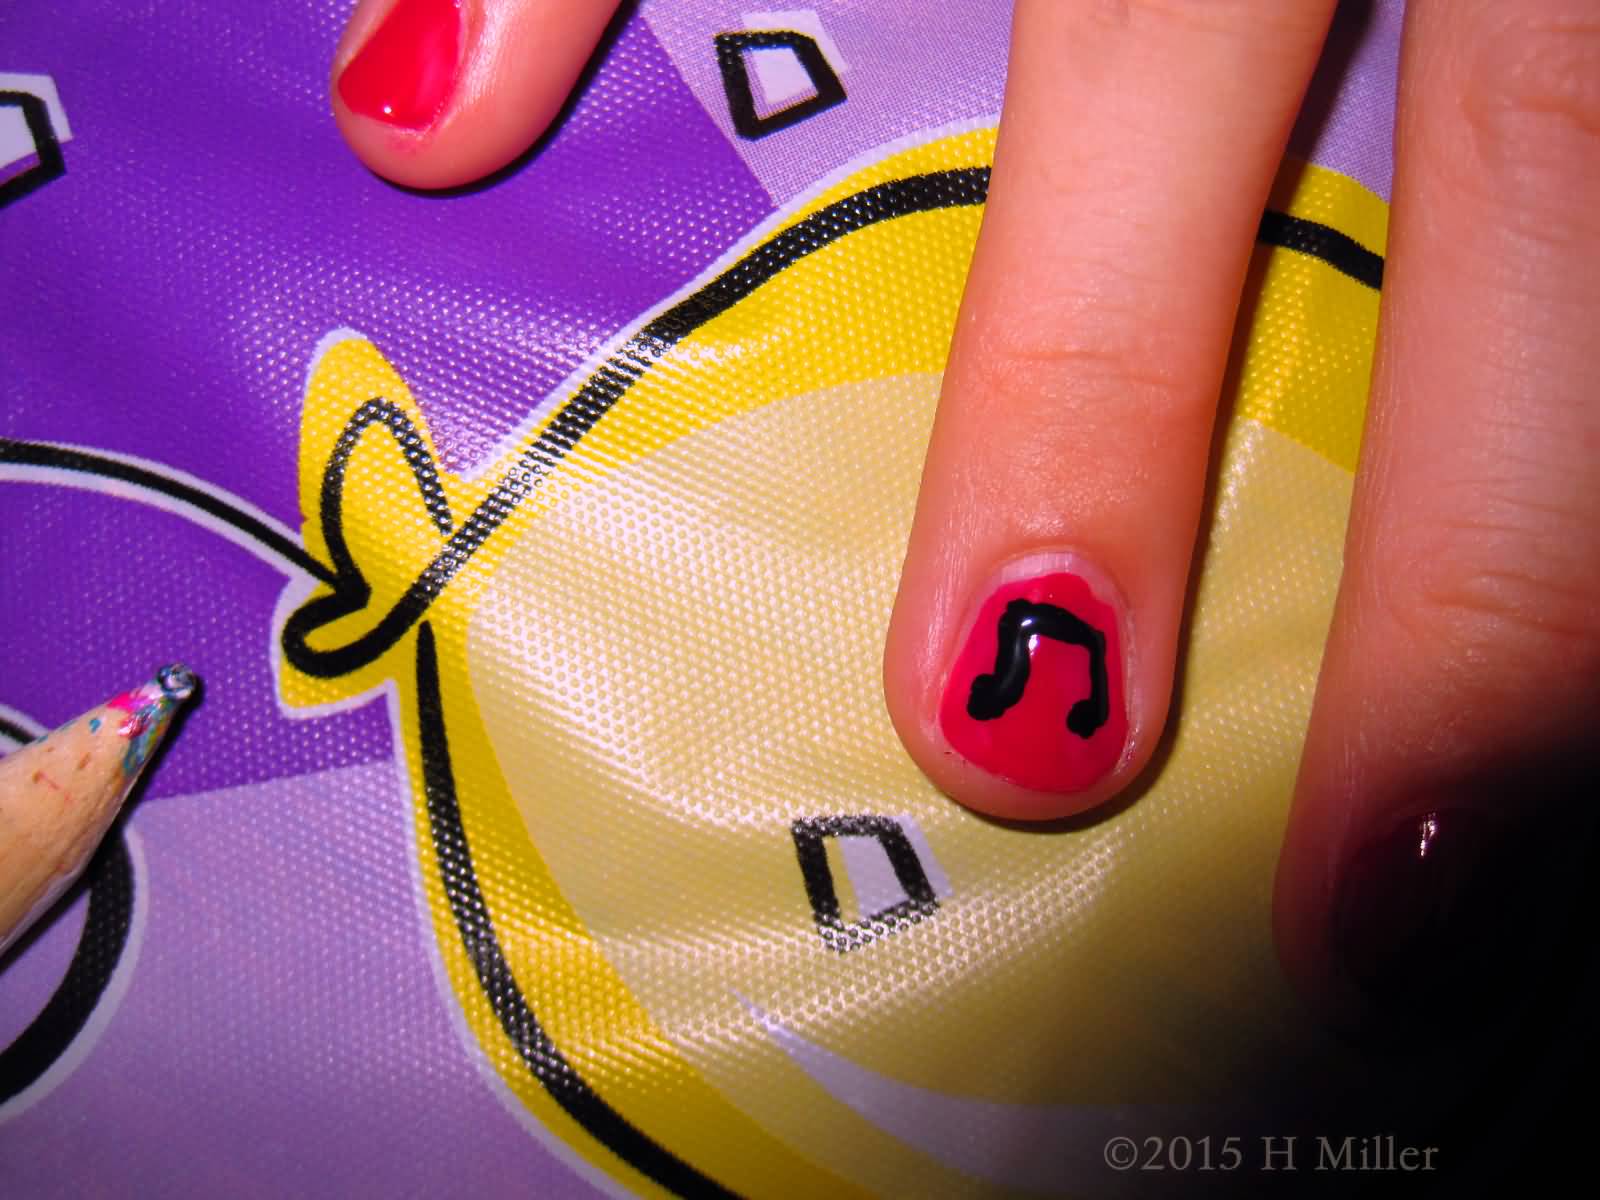 Red Nail With Black Music Note Nail Art